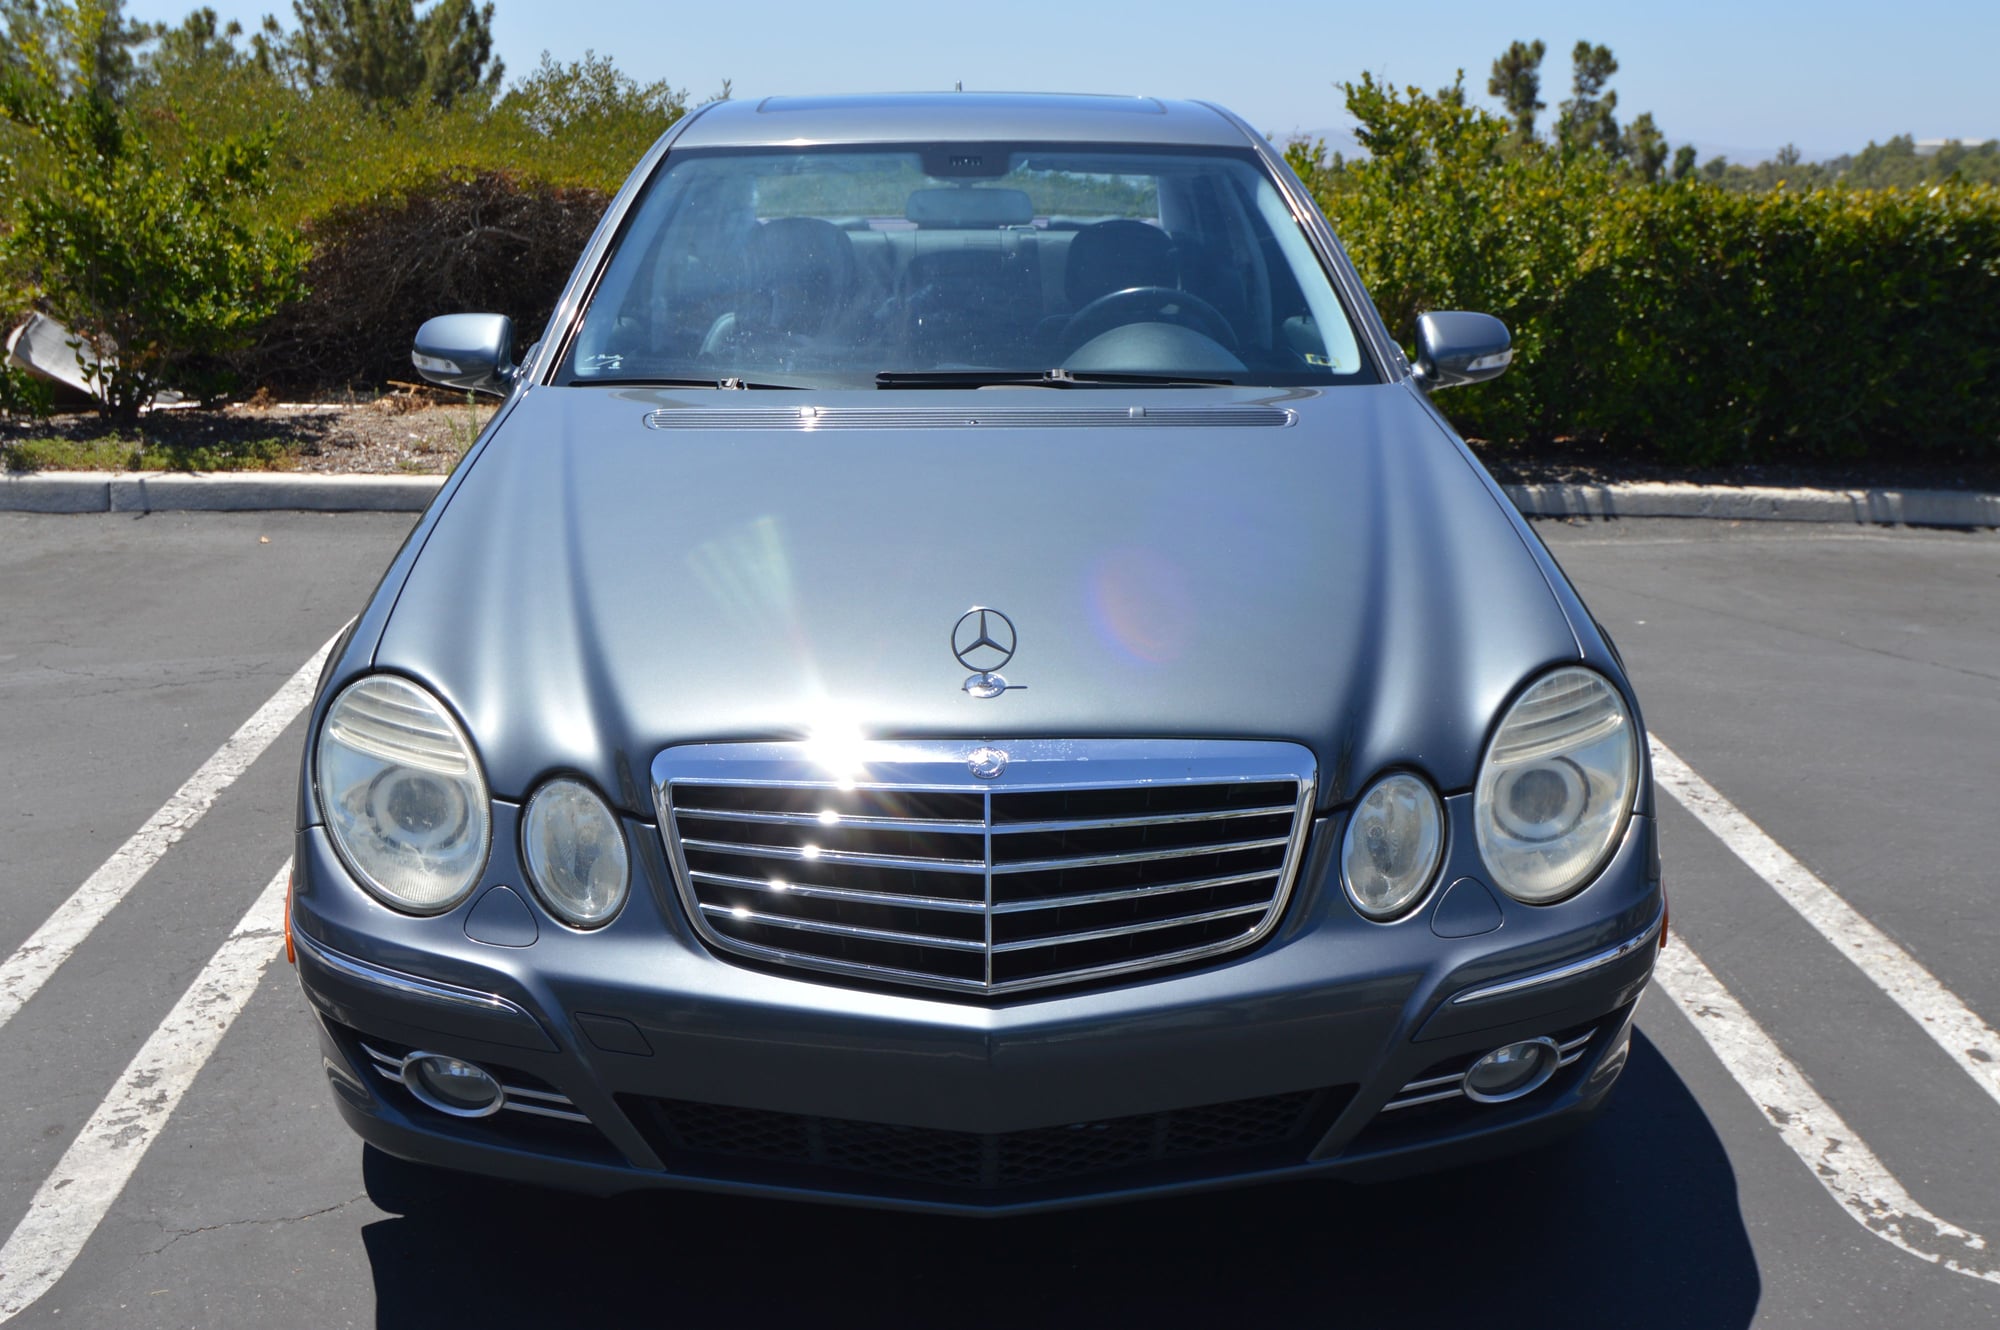 2008 Mercedes-Benz E350 - 2008 E350 - Used - VIN WDBUF56X98B249090 - 169,869 Miles - 6 cyl - 2WD - Automatic - Sedan - Gray - Lake Forrest, CA 92610, United States